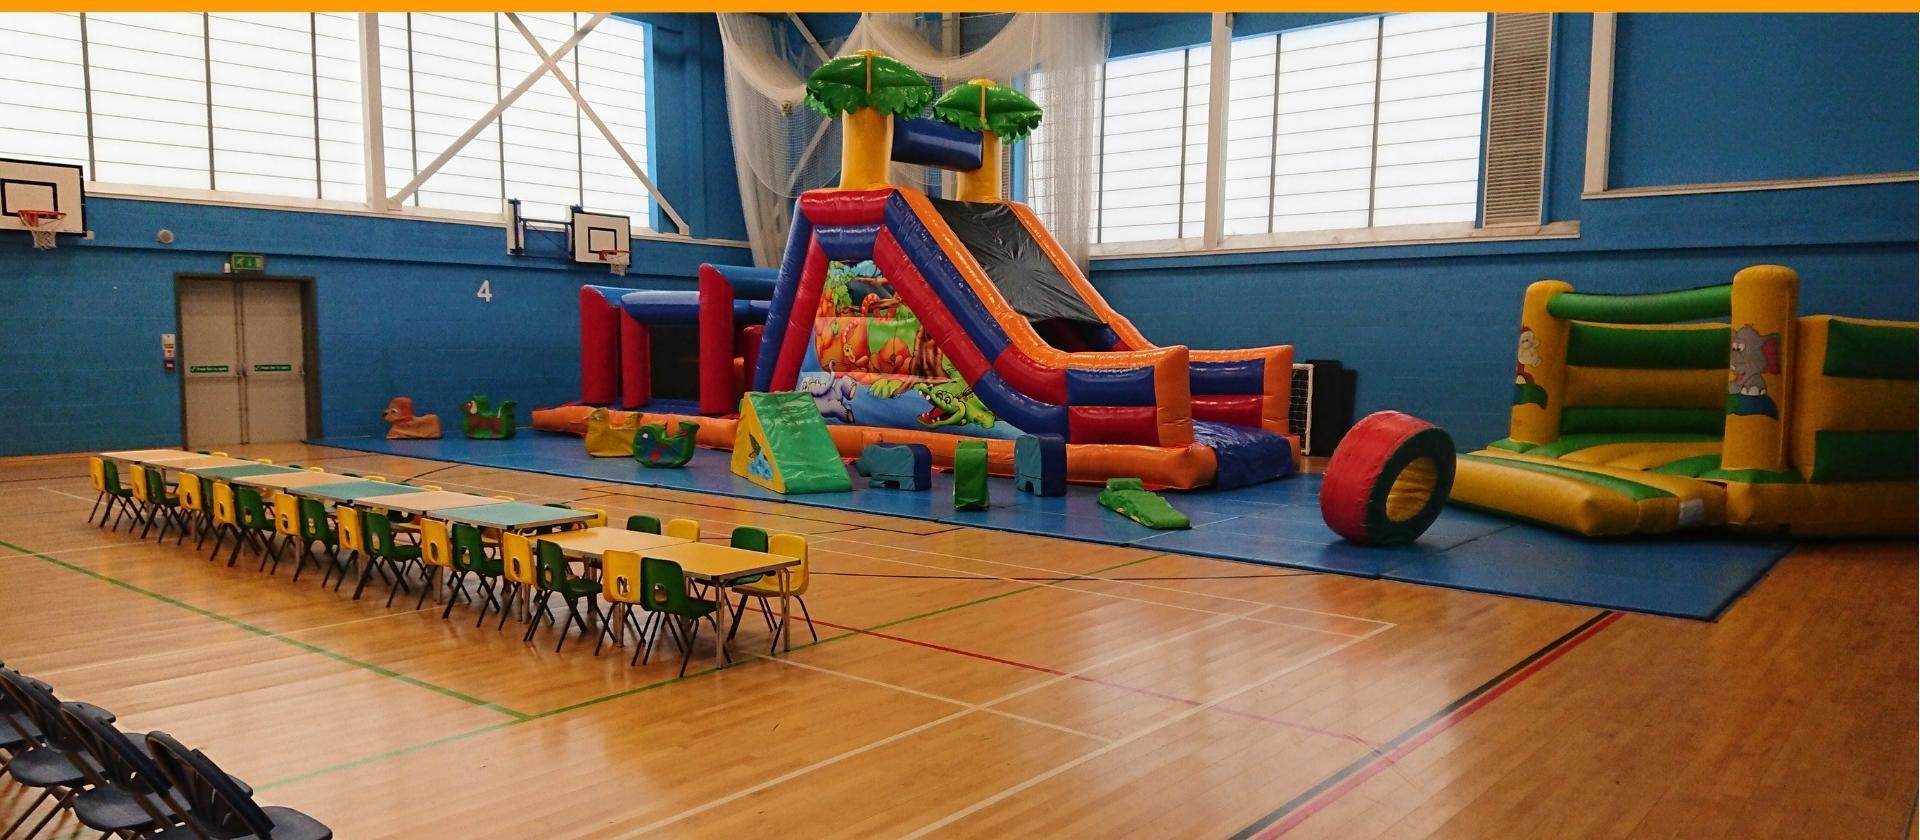 Coleshill leisure centre childrens birthday party set up